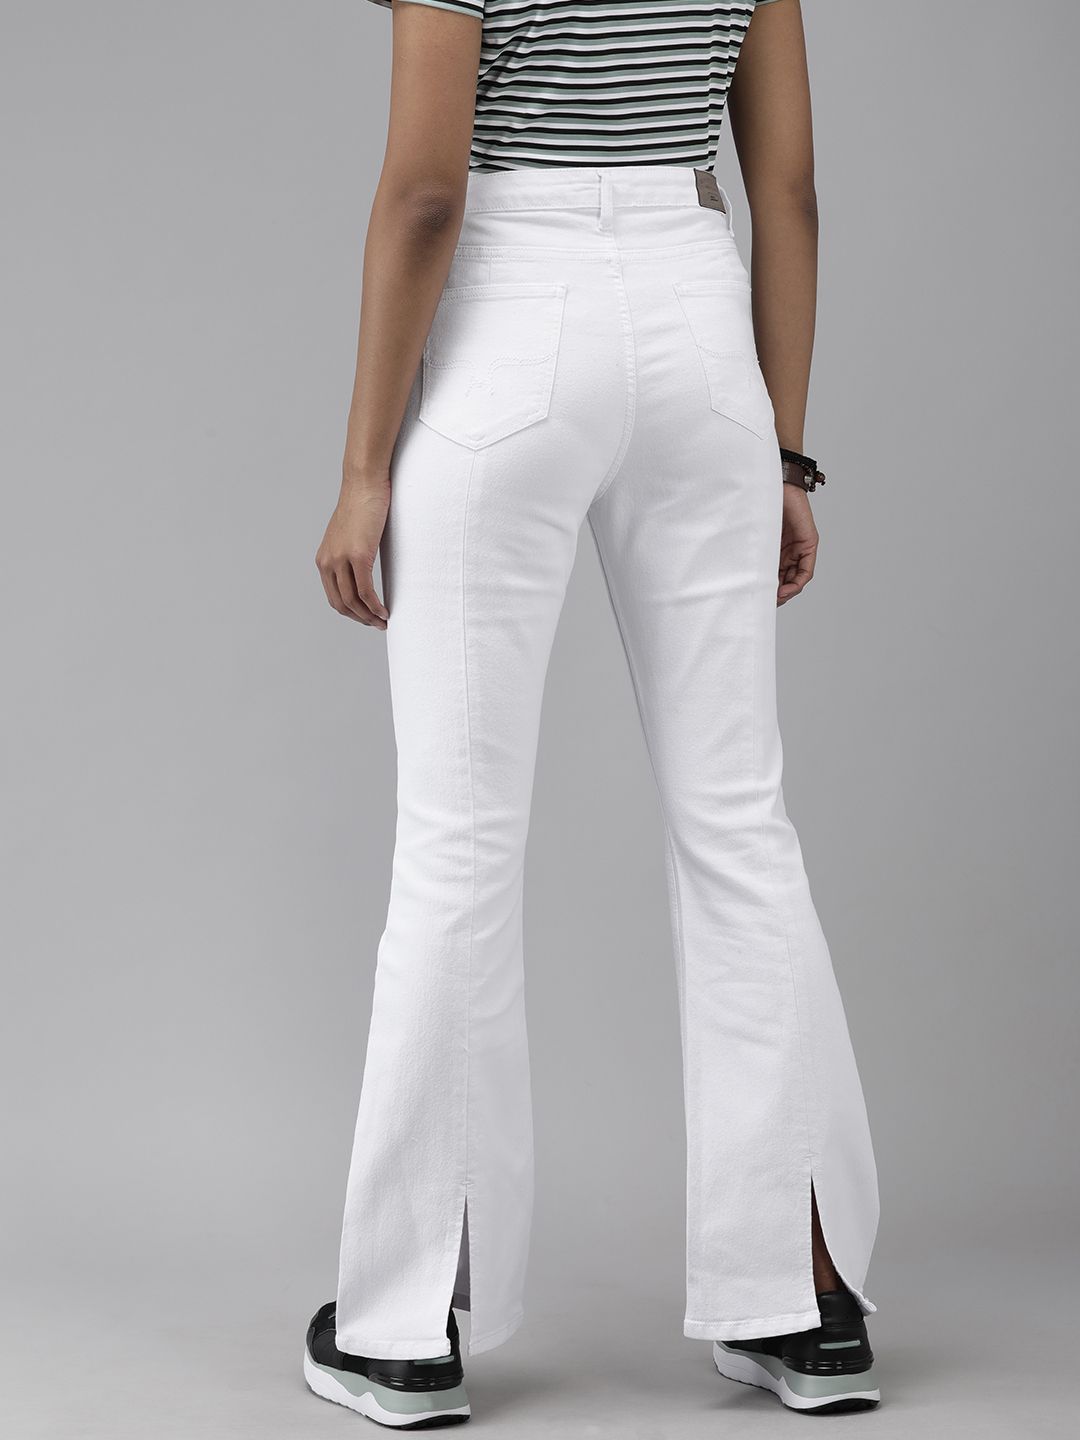 The Roadster Lifestyle Co Women White Bootcut High-Rise Stretchable Jeans Price in India